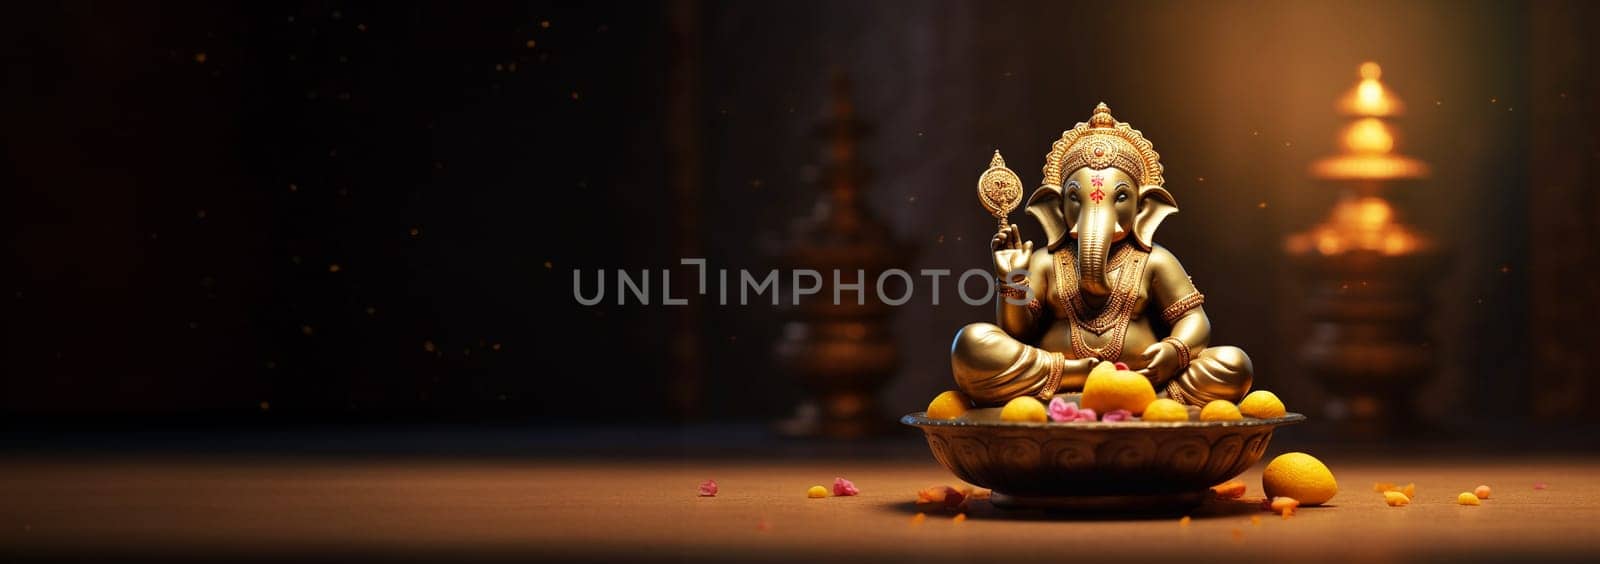 Lord Ganpati, colorful Hindu god Ganesha on dark background. Statue on wooden table with a smoke of incense and a candle. Copy space. Space for text